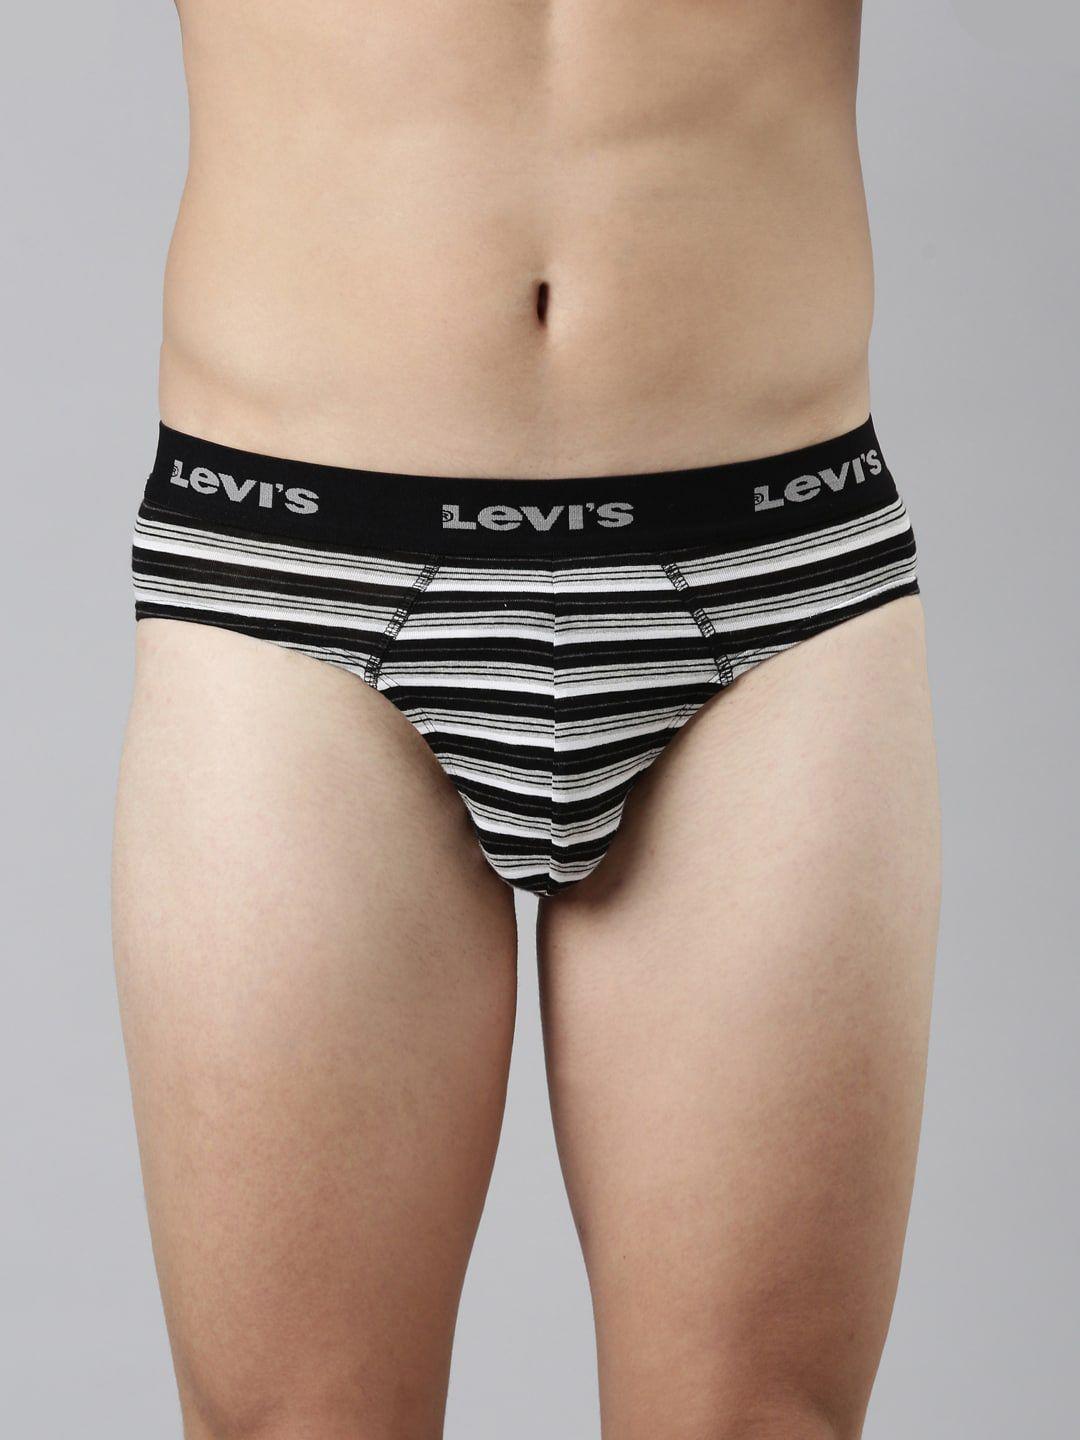 levis striped anti bacterial cotton basic brief